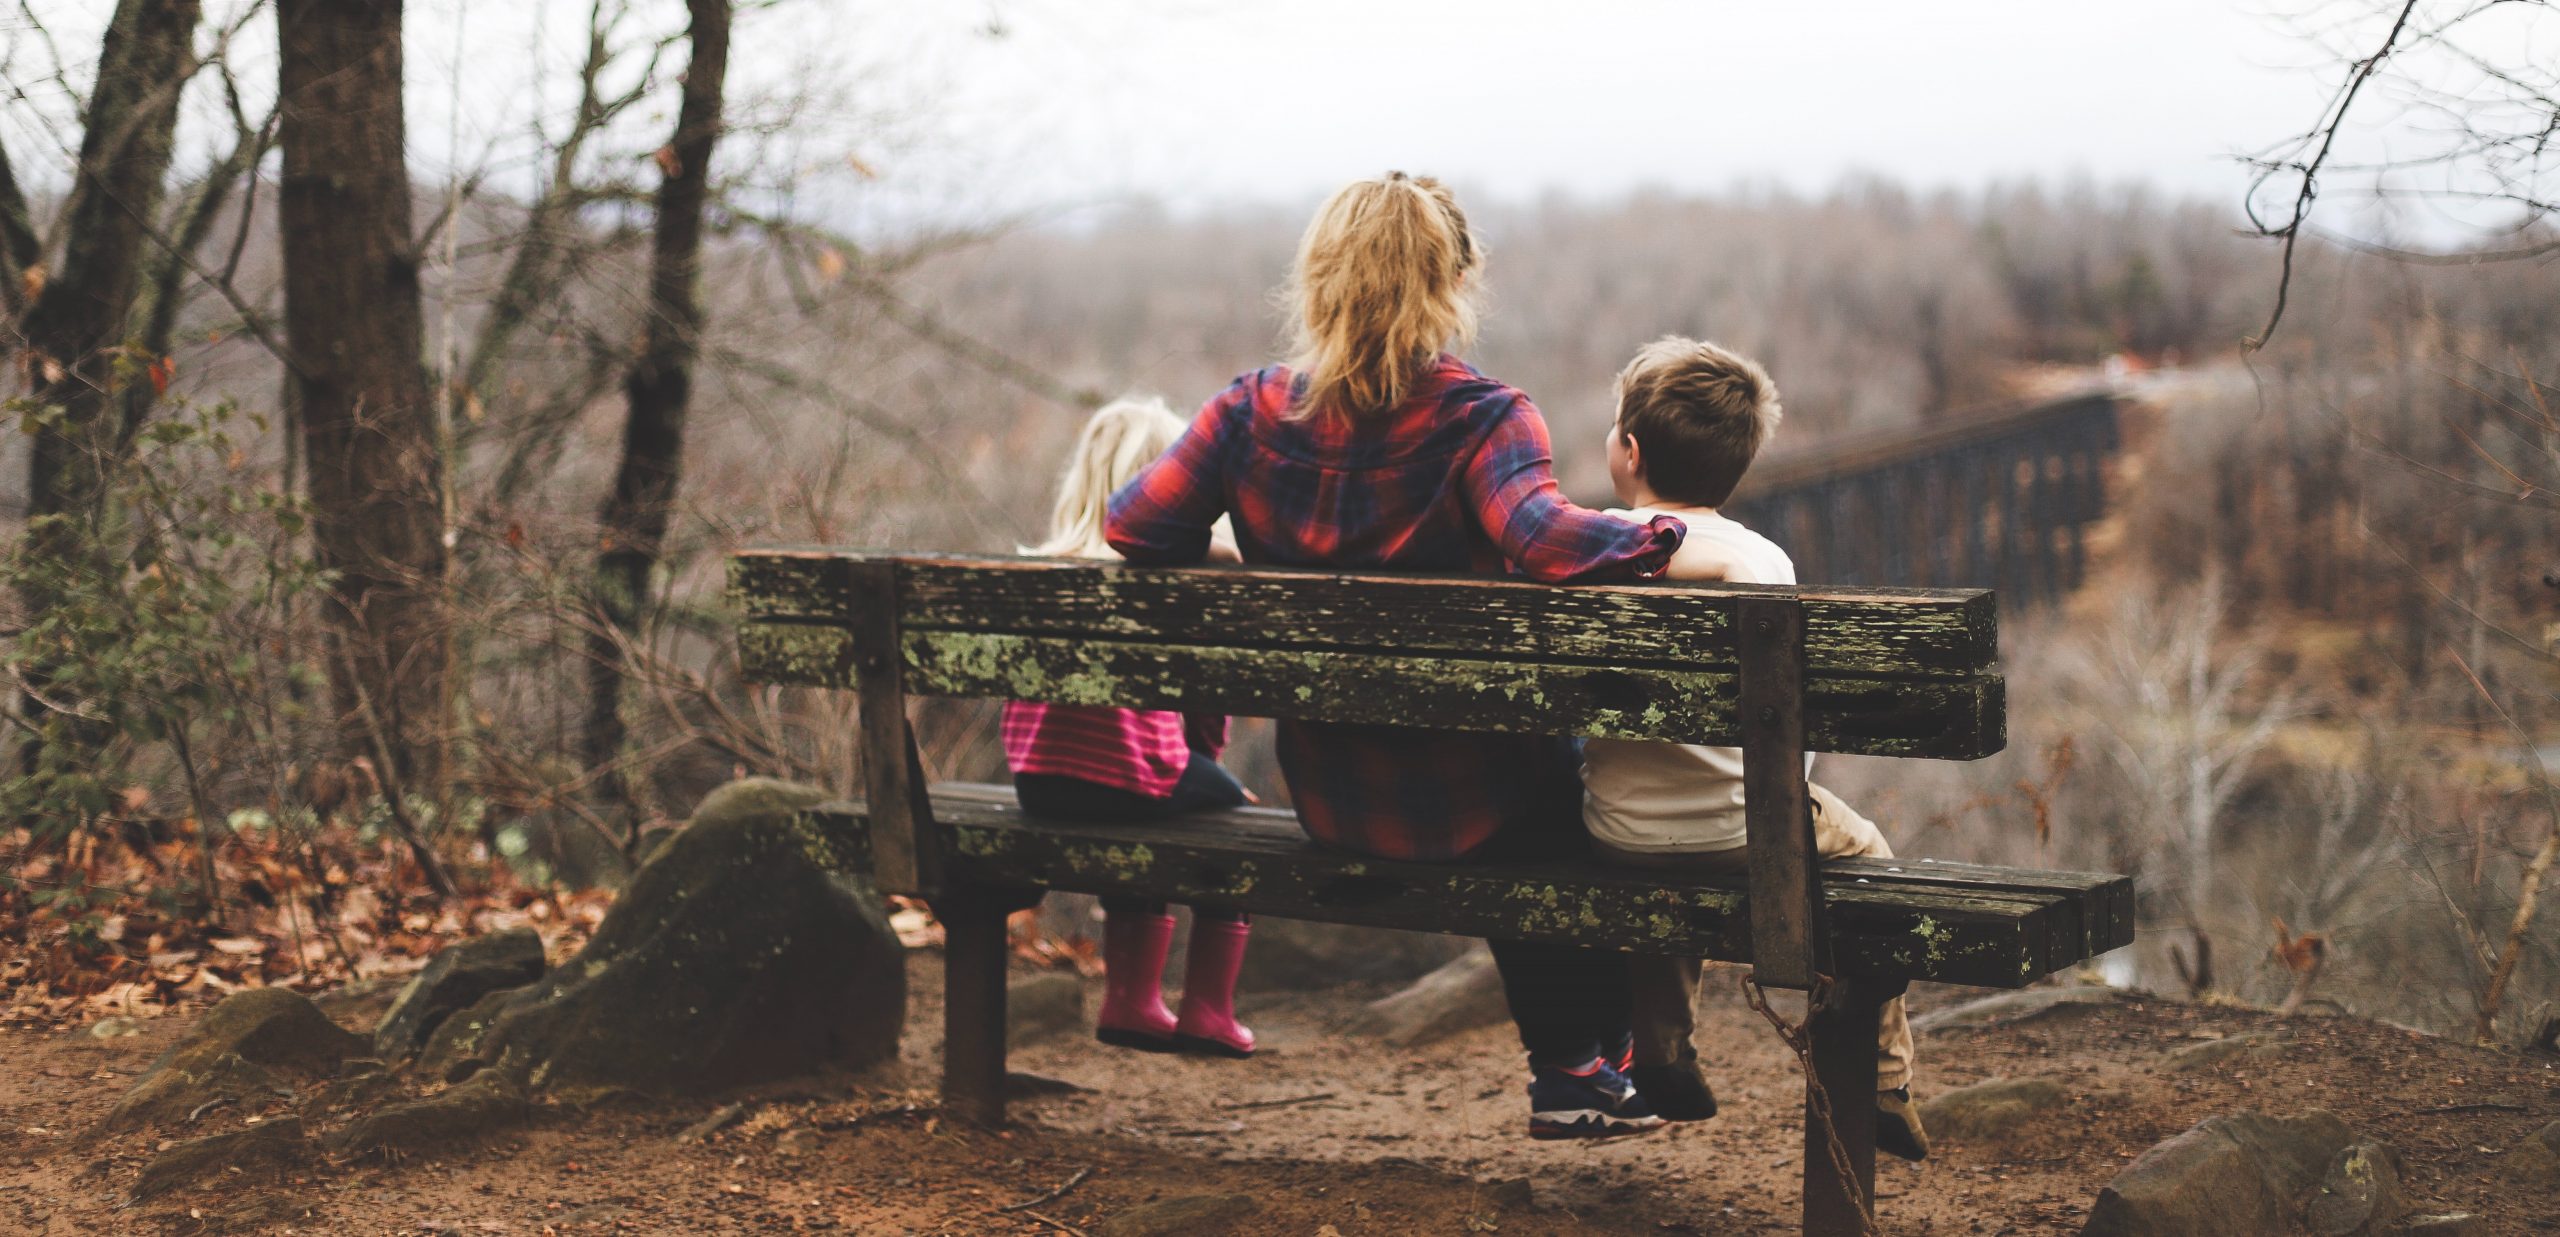 Family law is constantly evolving to promote positive co-parenting relationships.